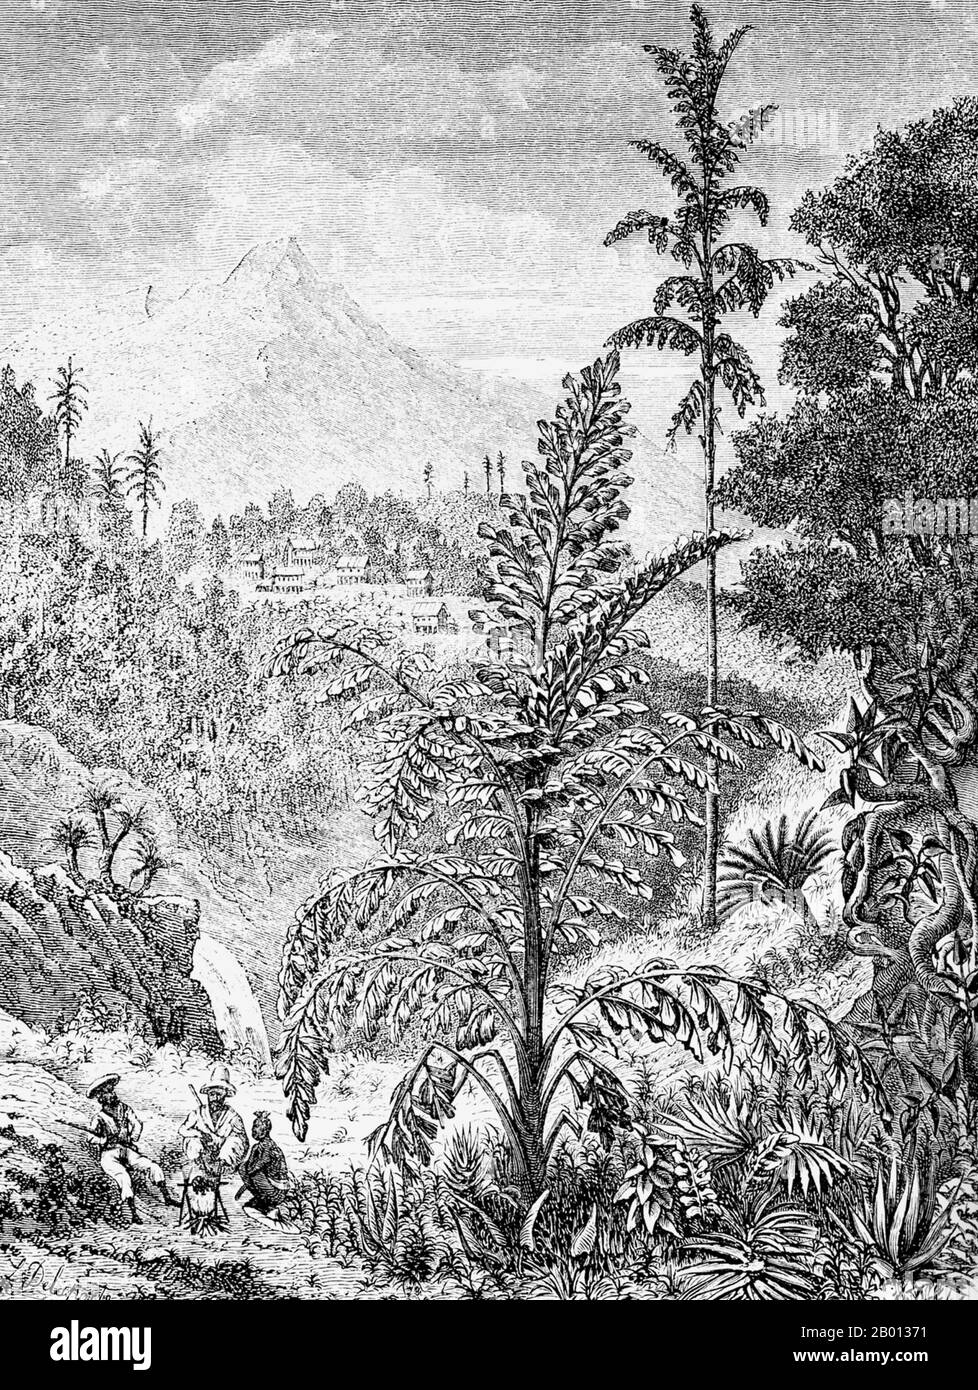 Indochina: A sketch of a date palm (Caryota urens), probably in central Laos. Engraving by Louis Delaporte (1842-1925), 1867.  This illustration by Louis Delaporte is one of dozens he produced during his two-year venture (1866-68) with the Mekong Exploration Commission sponsored by the French Ministry of the Navy, the intention of which was to lay the groundwork for the expansion of French colonies in Indochina. Traveling the Mekong by boat, the small French delegation voyaged from Saigon to Phnom Penh to Luang Prabang, then farther north into Upper Laos and China's Yunnan province. Stock Photo